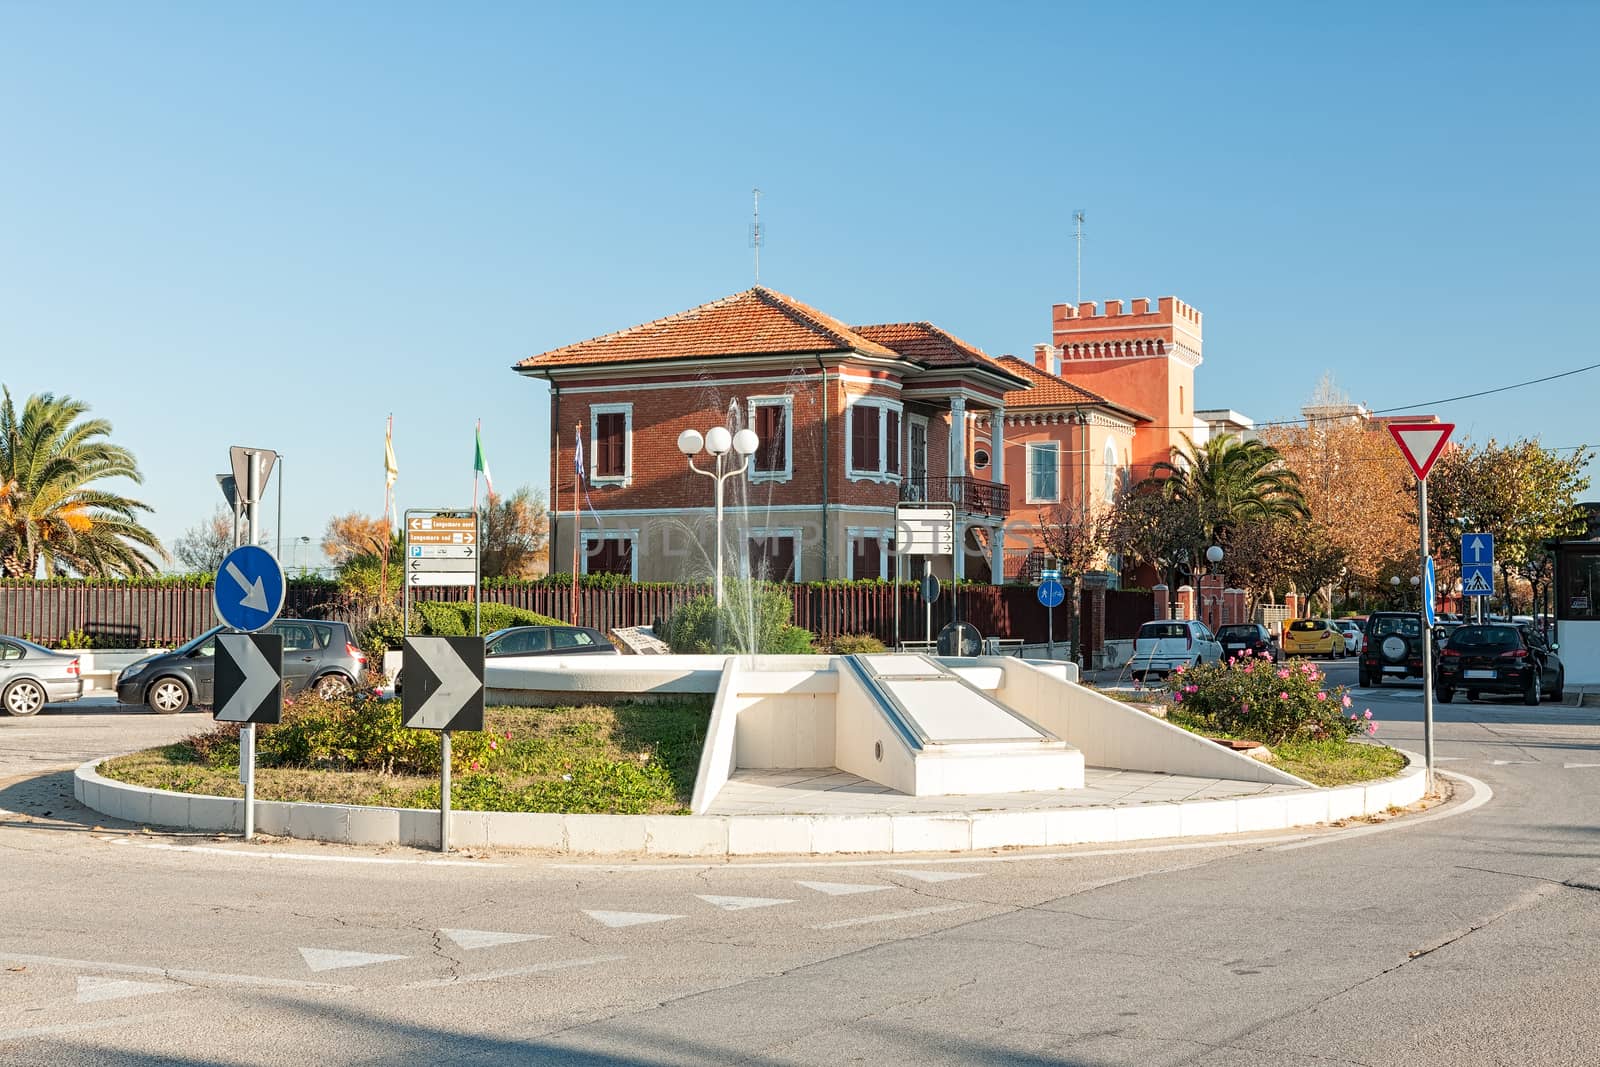 The roundabout with fountain inside in Marotta, Italy